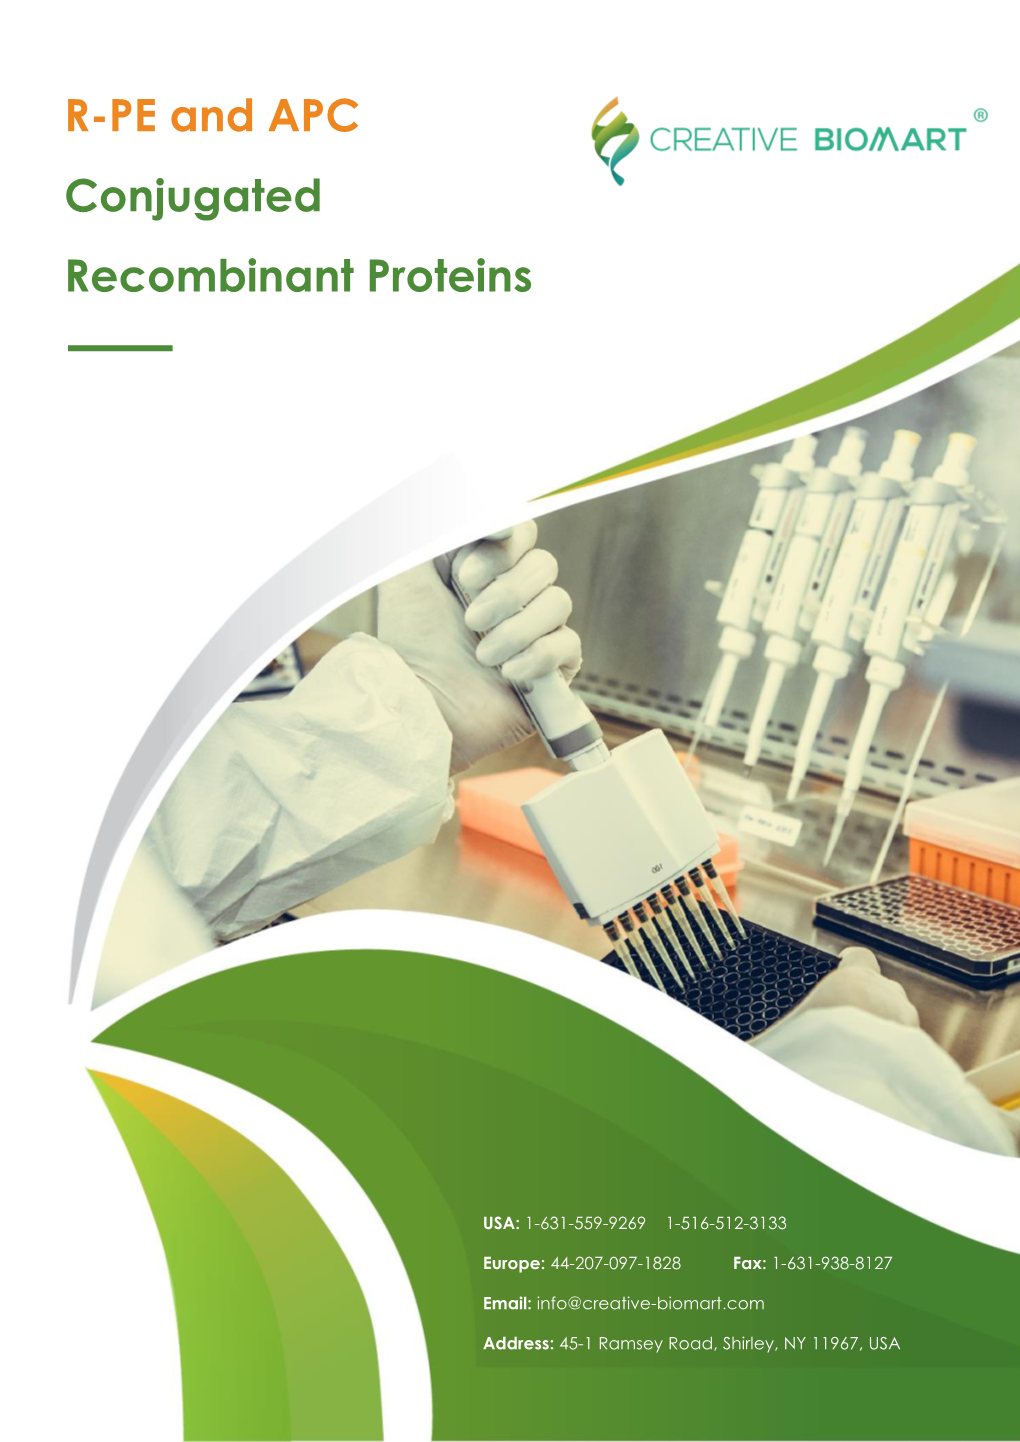 R-PE and APC Conjugated Recombinant Proteins